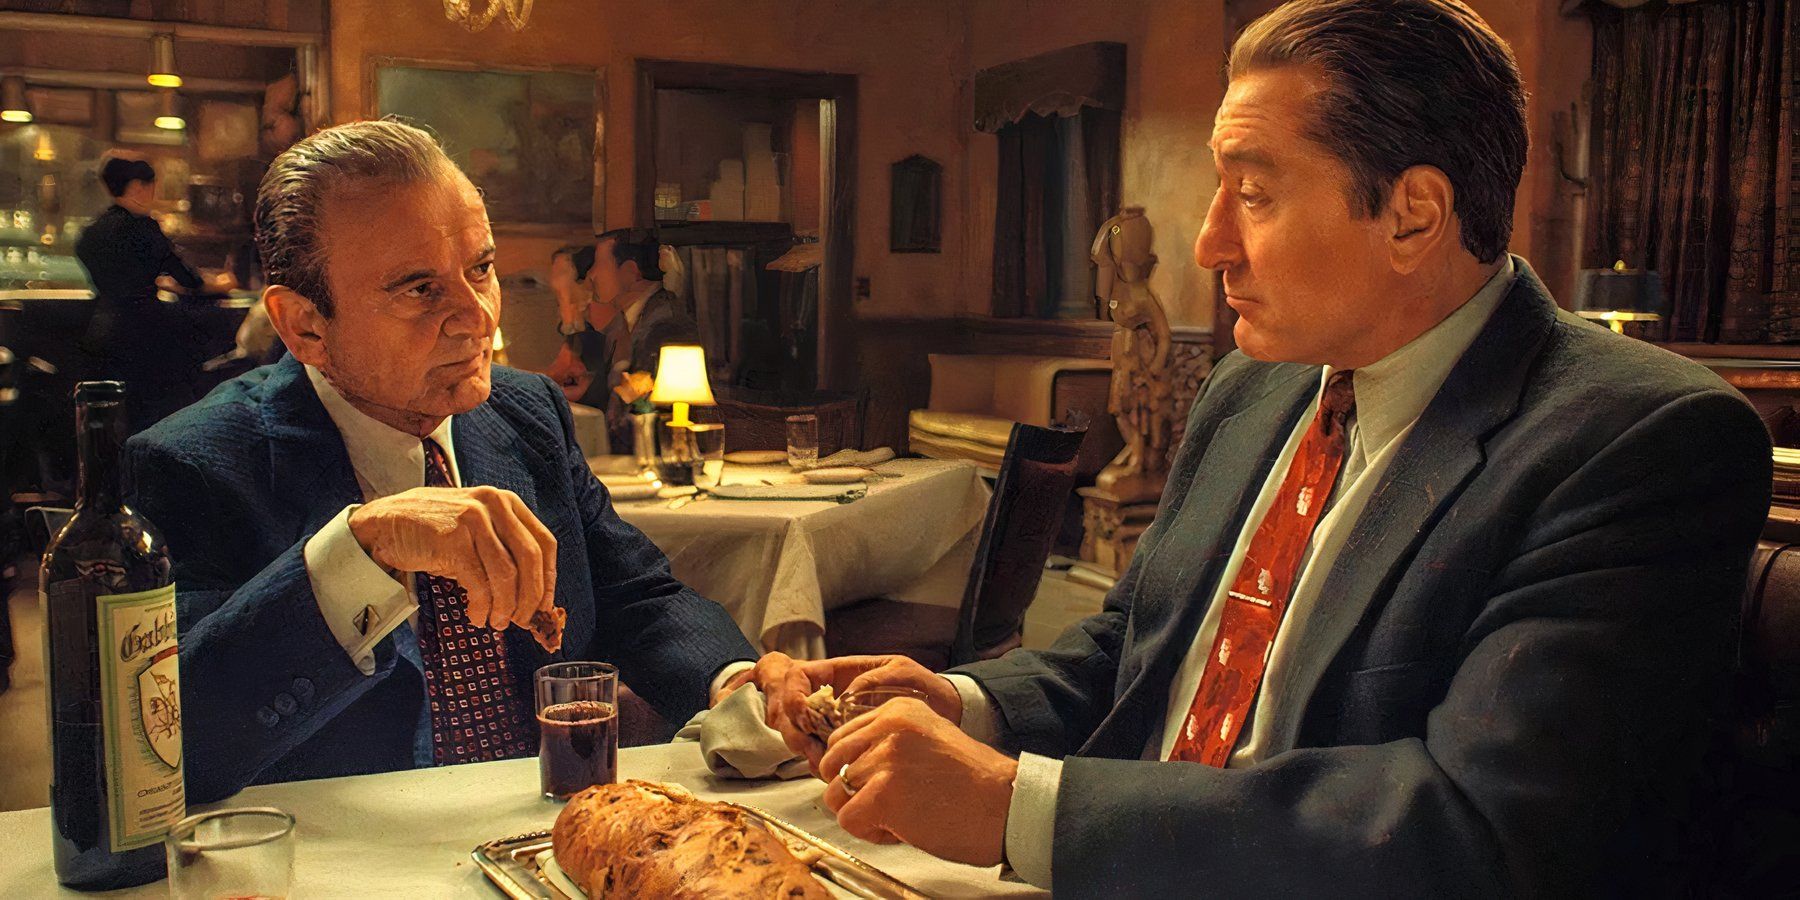 Russell Bufalino and Frank Sheeran share a conspiratorial dinner together in The Irishman.